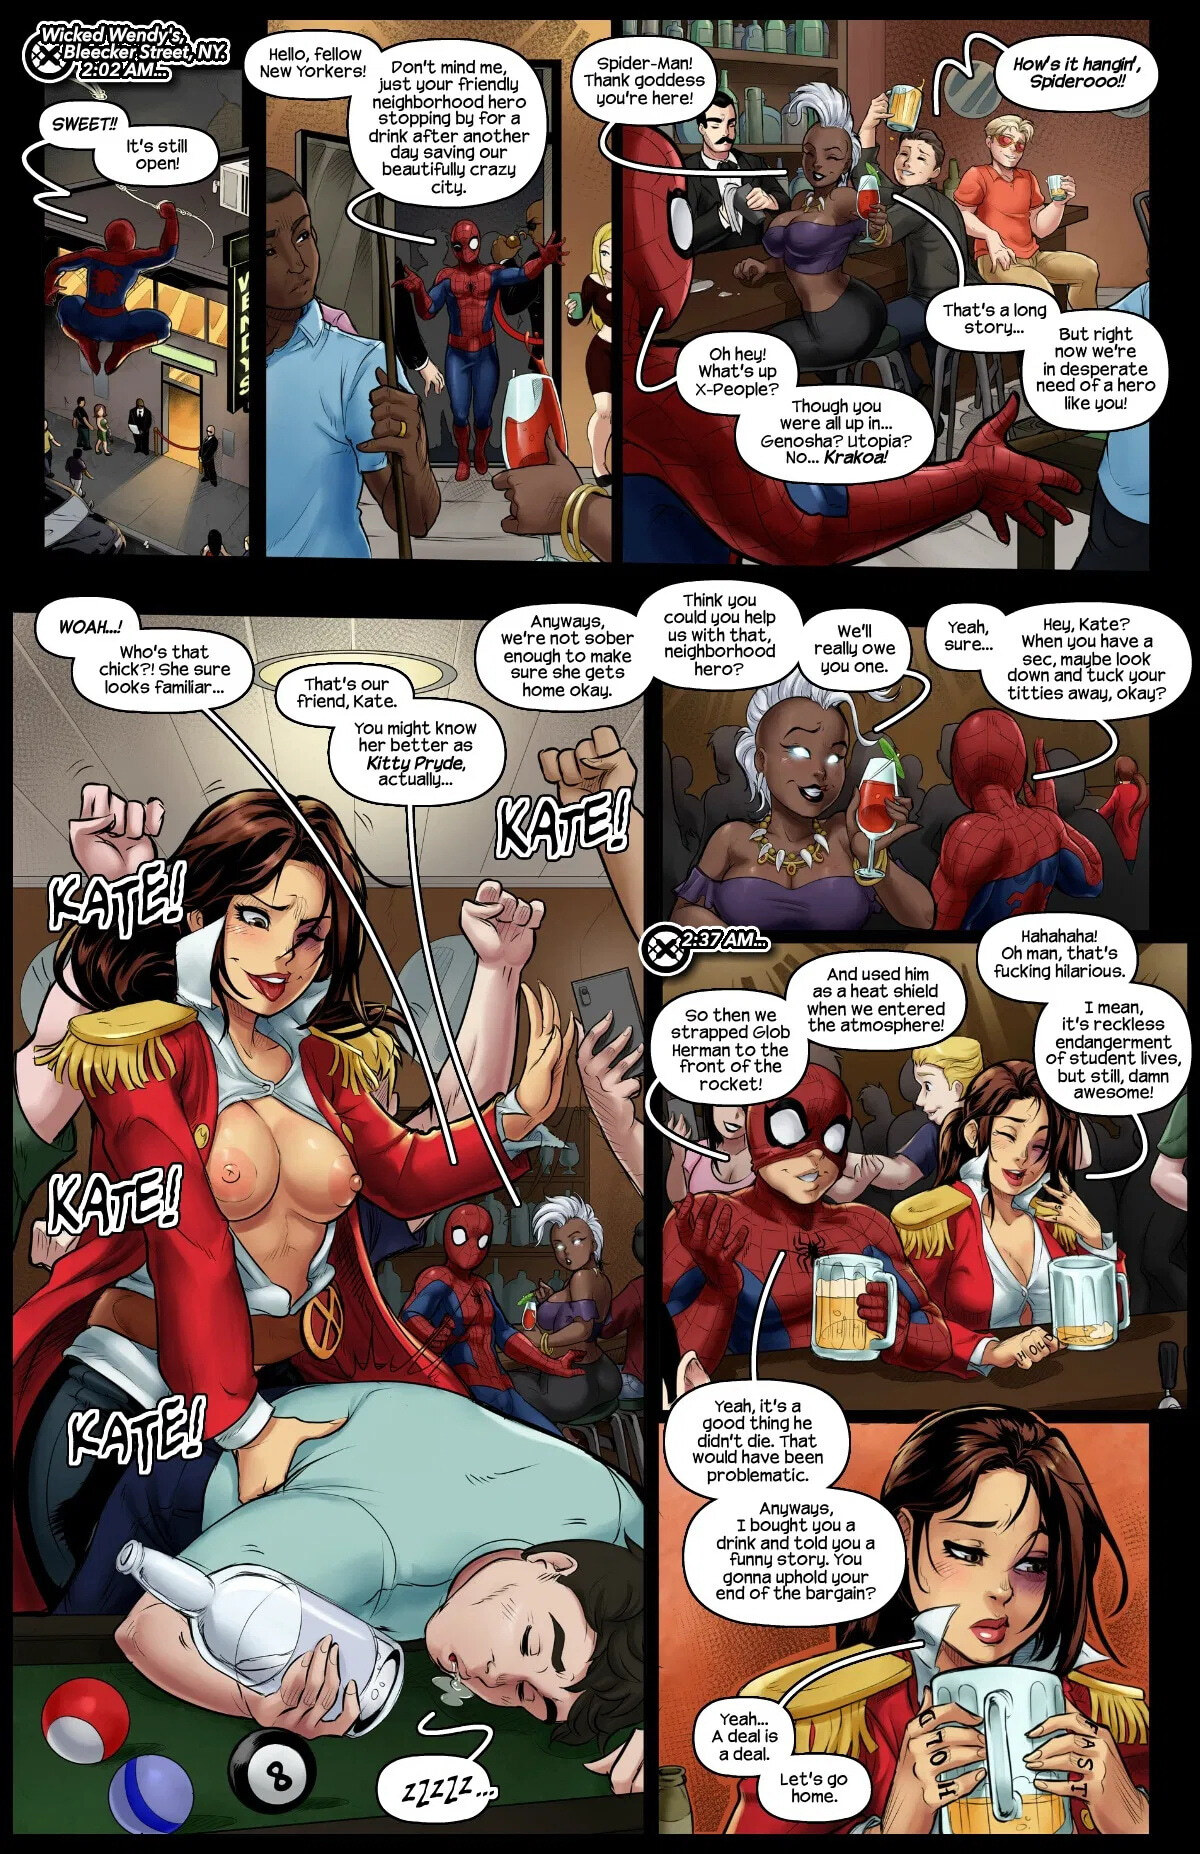 House Of XXX - Captain Kate - Page 2